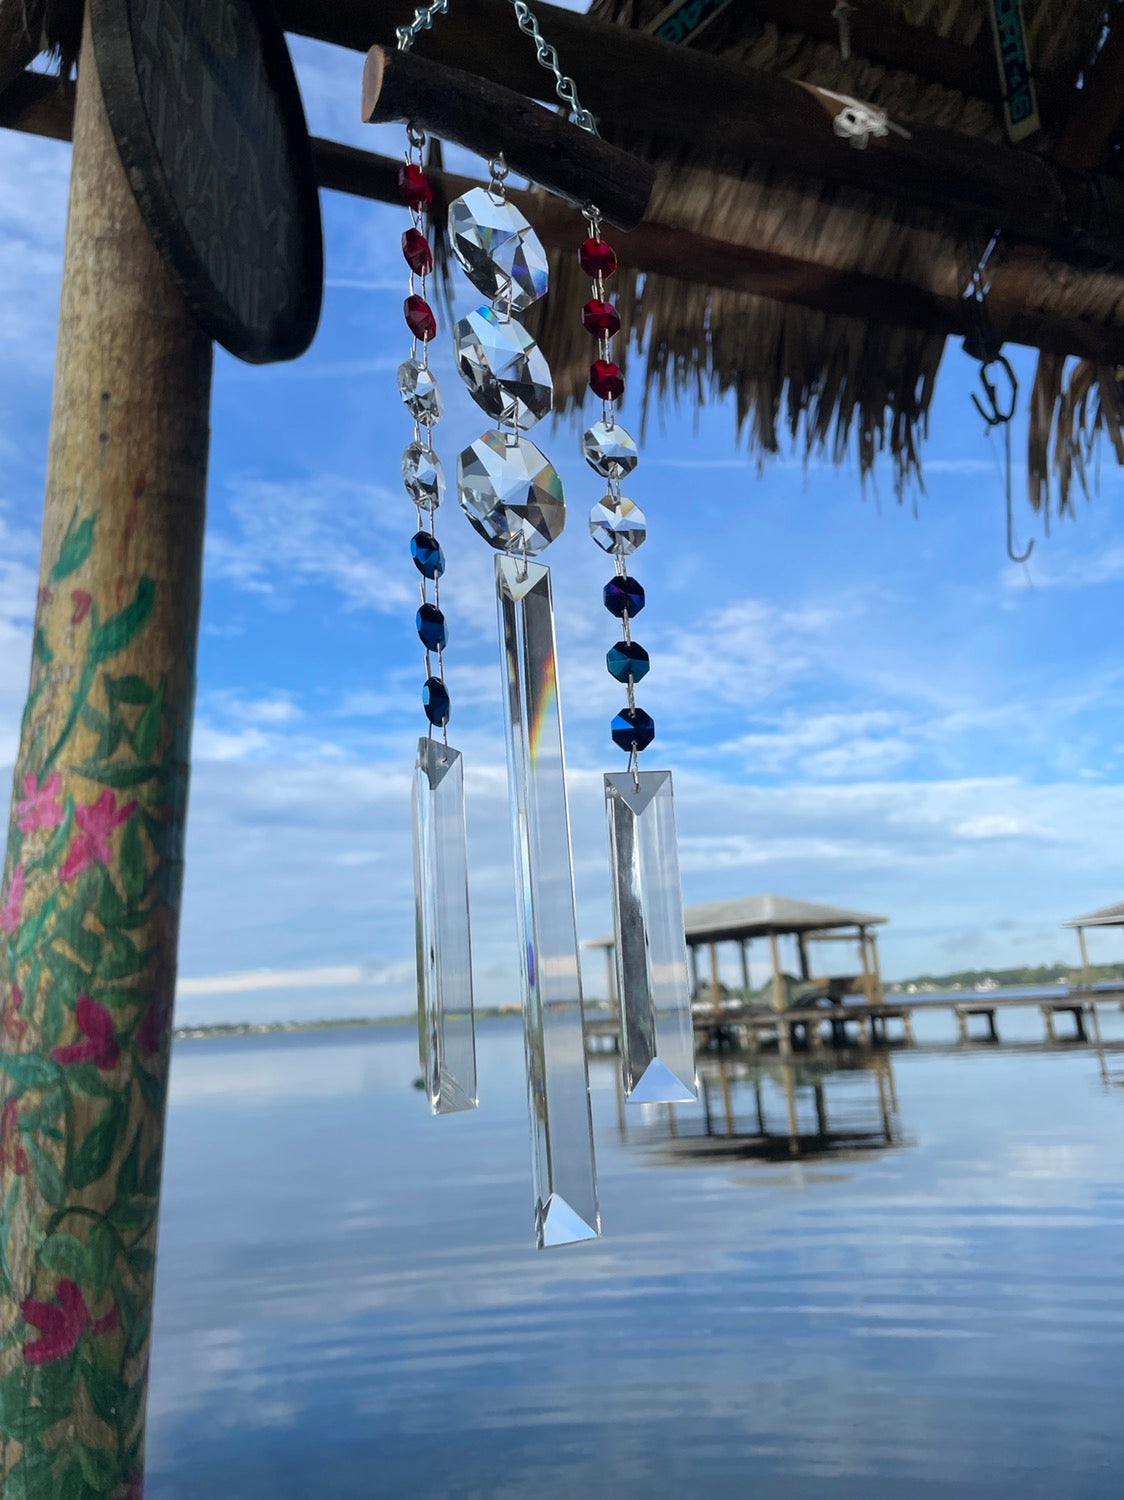 wind-chime hand made art dazzling driftwood